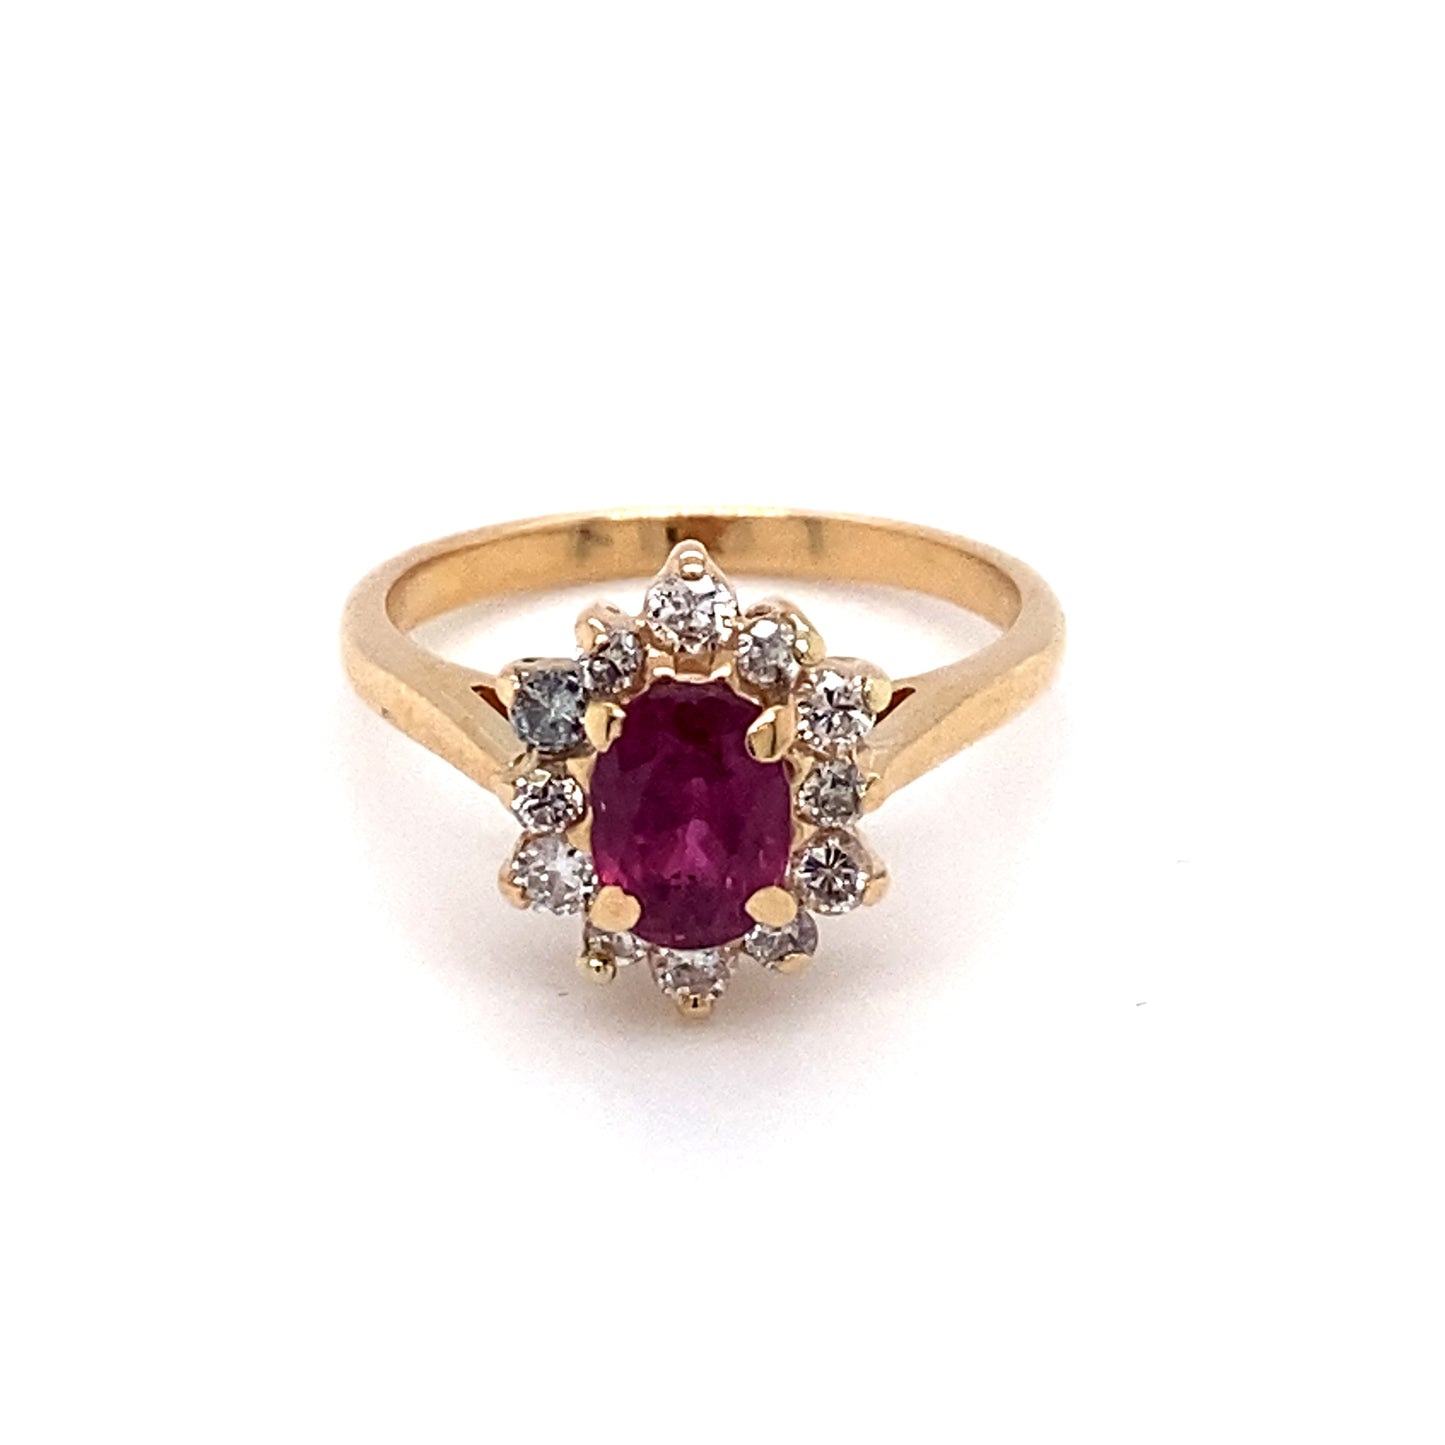 Circa 1960 1 Carat Oval Ruby and Diamond Ring in 14K Gold